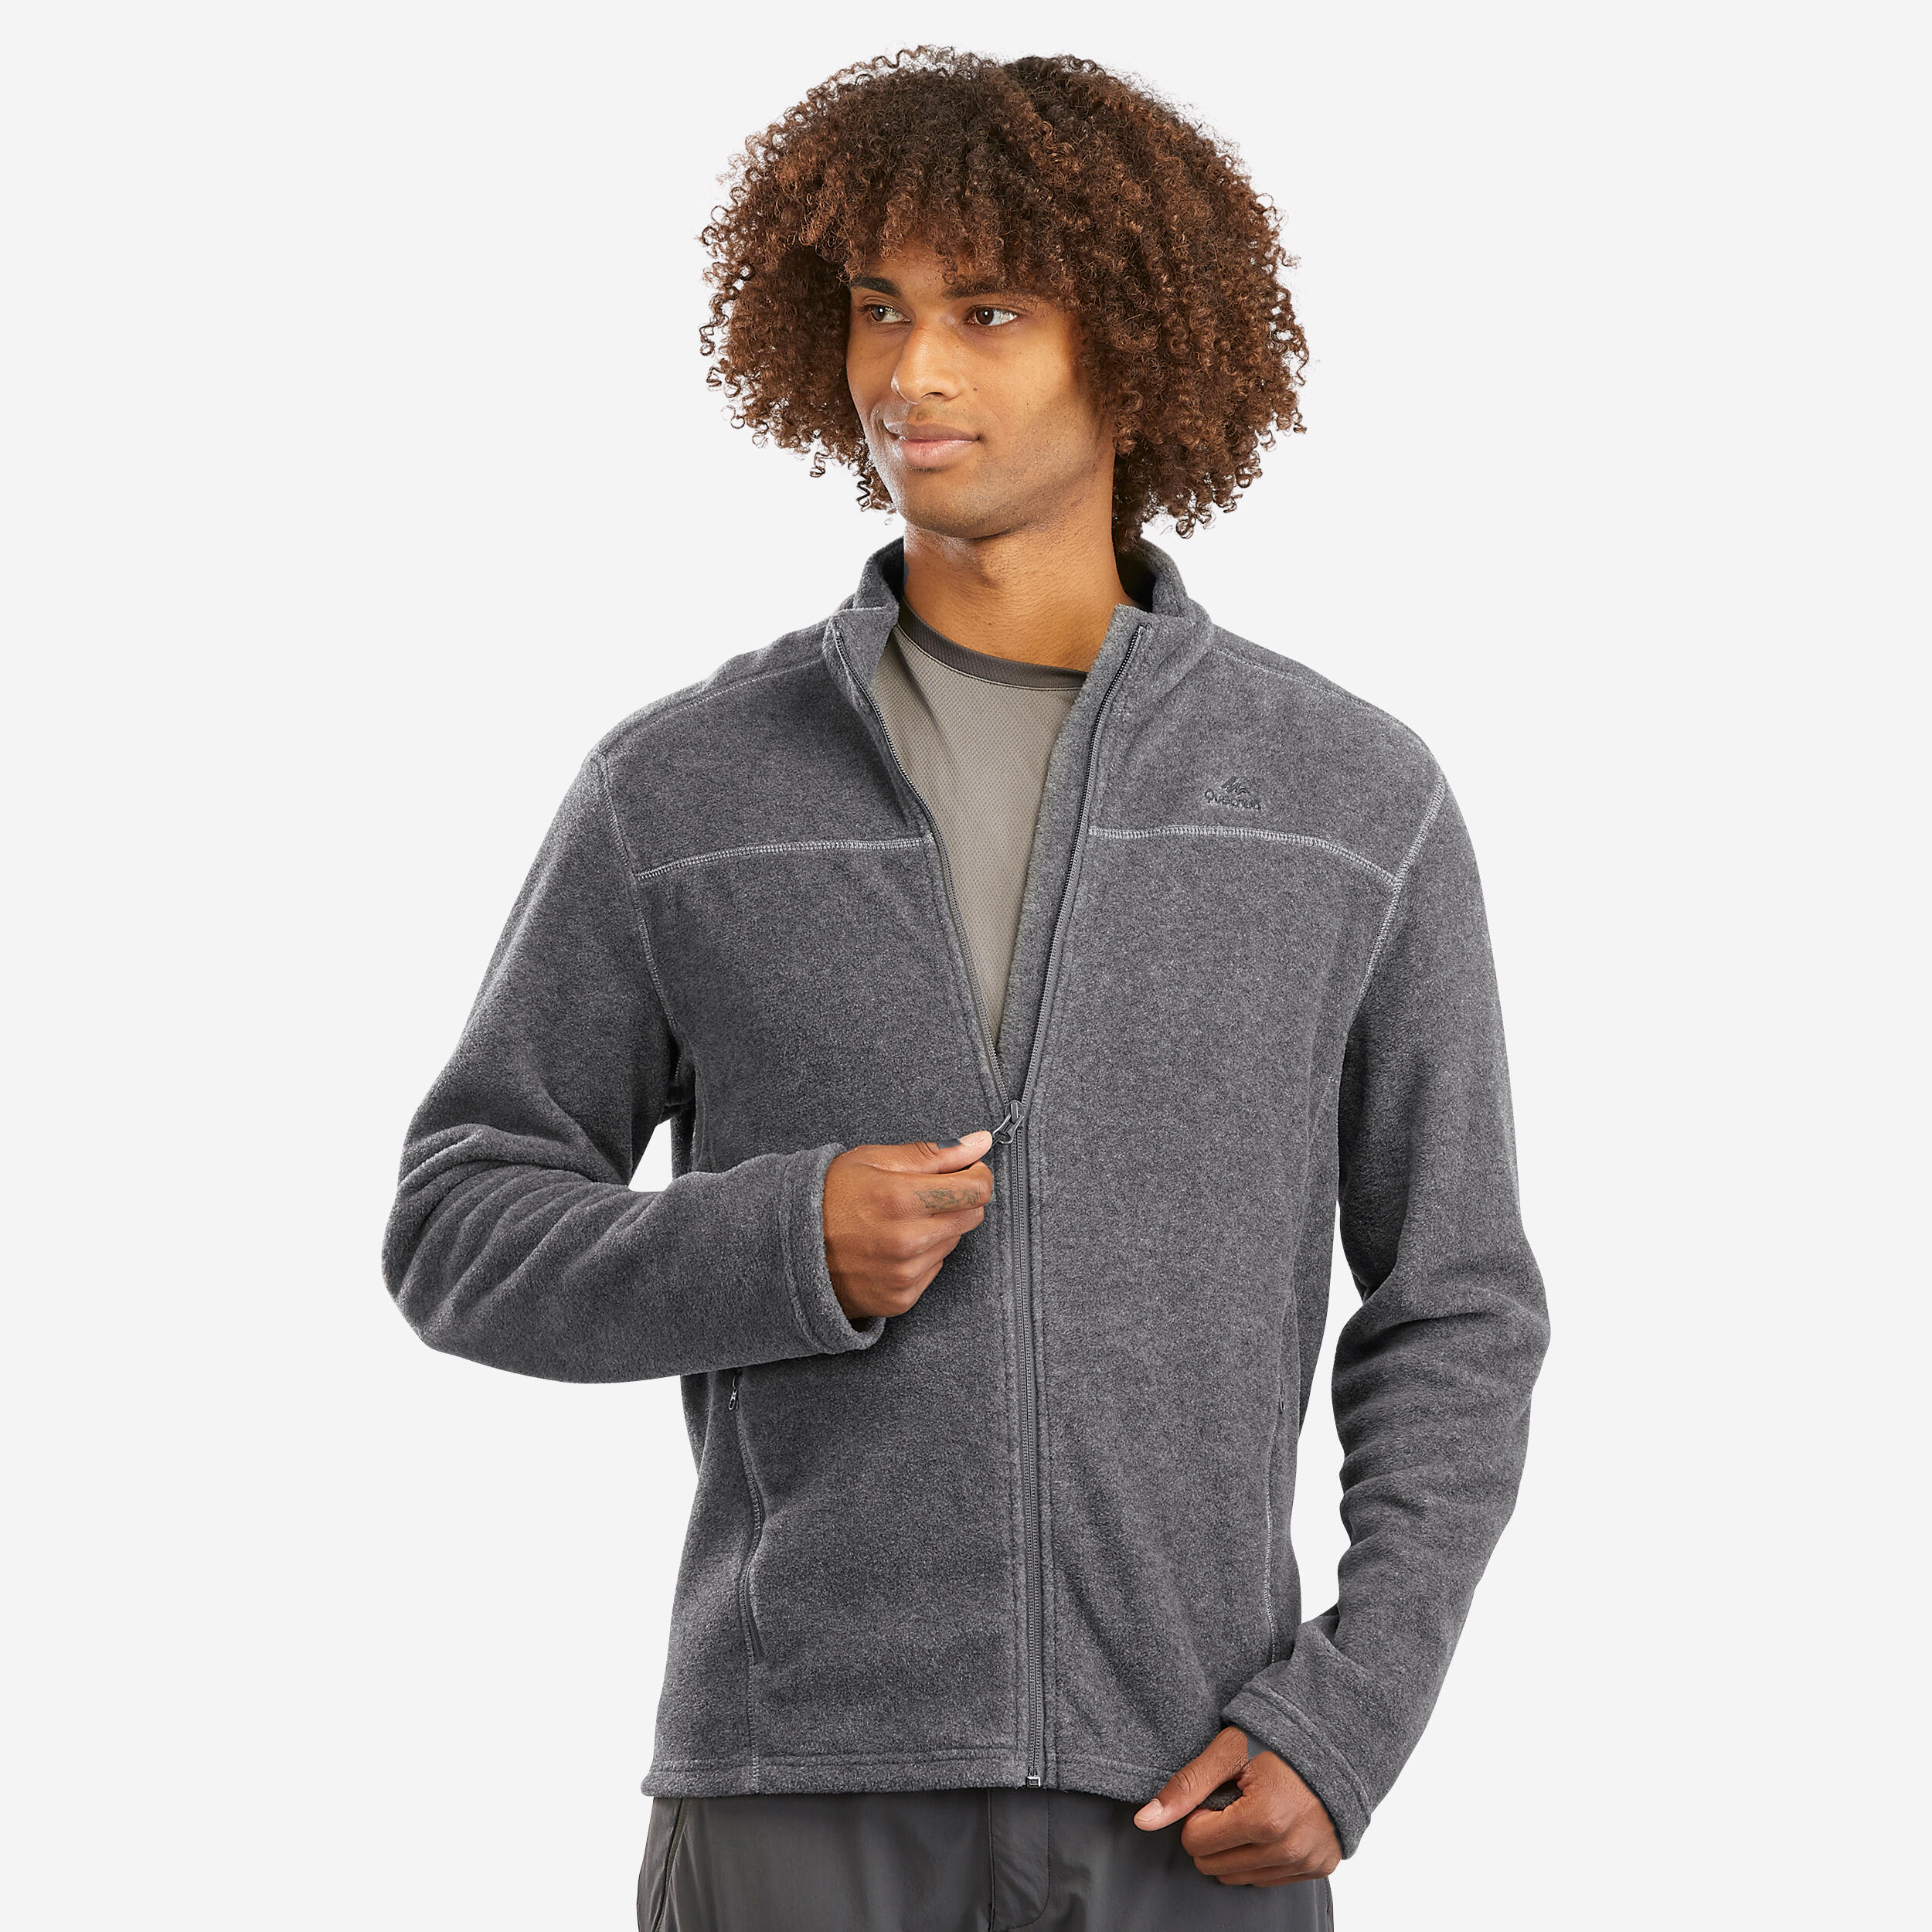 Unlock Wilderness' choice in the Decathlon Vs Patagonia comparison, the MH120 Fleece Jacket by Decathlon